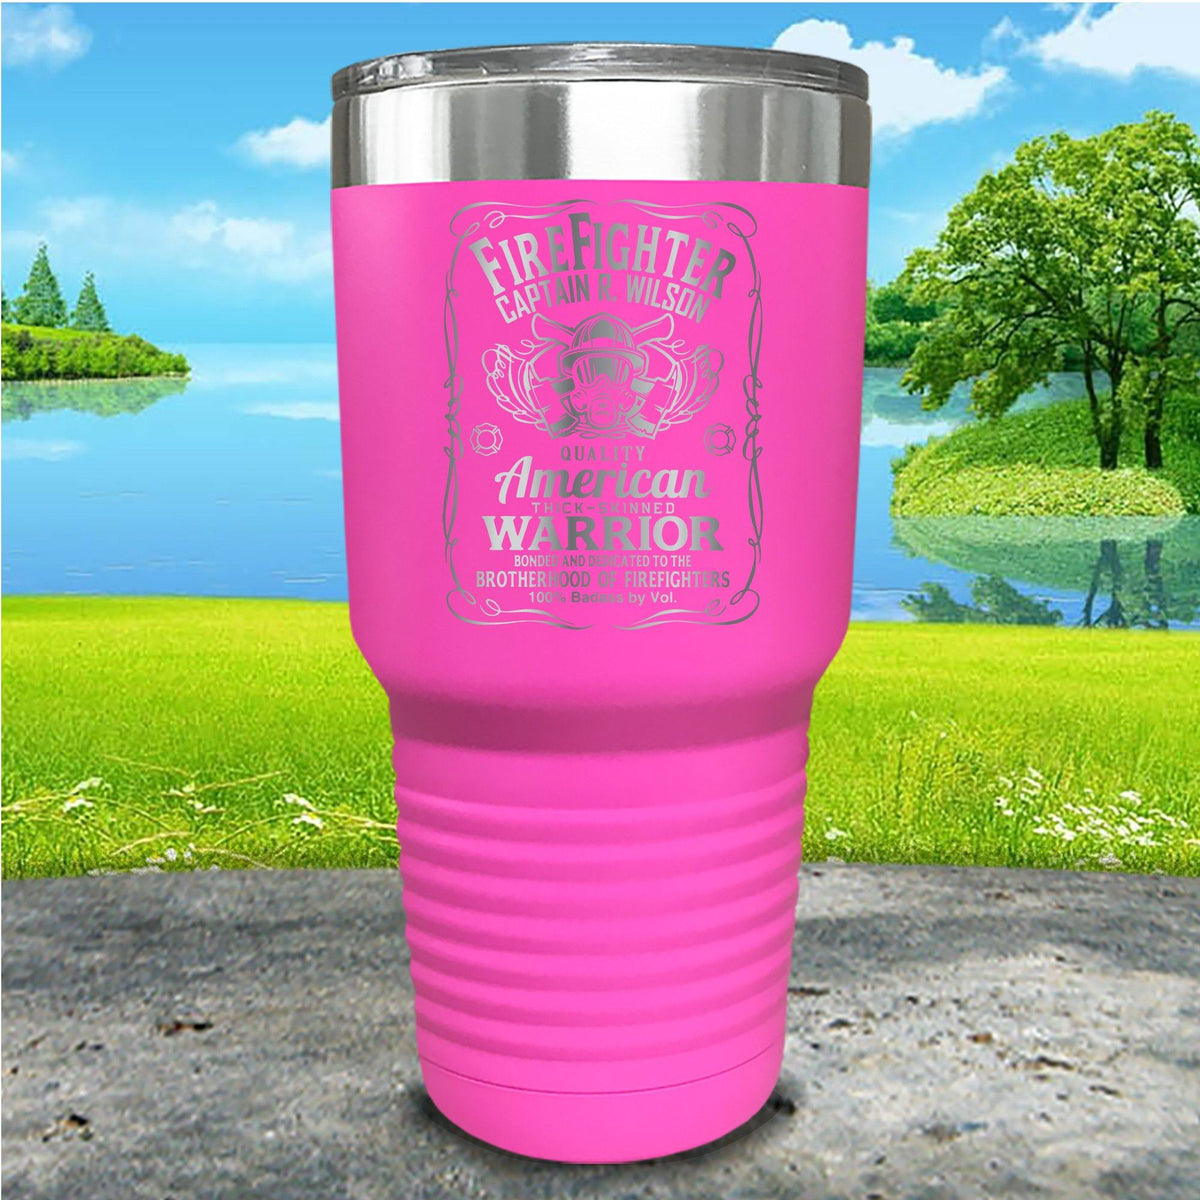 NEW! Monogrammed Valentine Tumbler! 19 oz., BPA Free, double walled. $14  Find me on Facebook, Petal Pushers, Greenville, SC